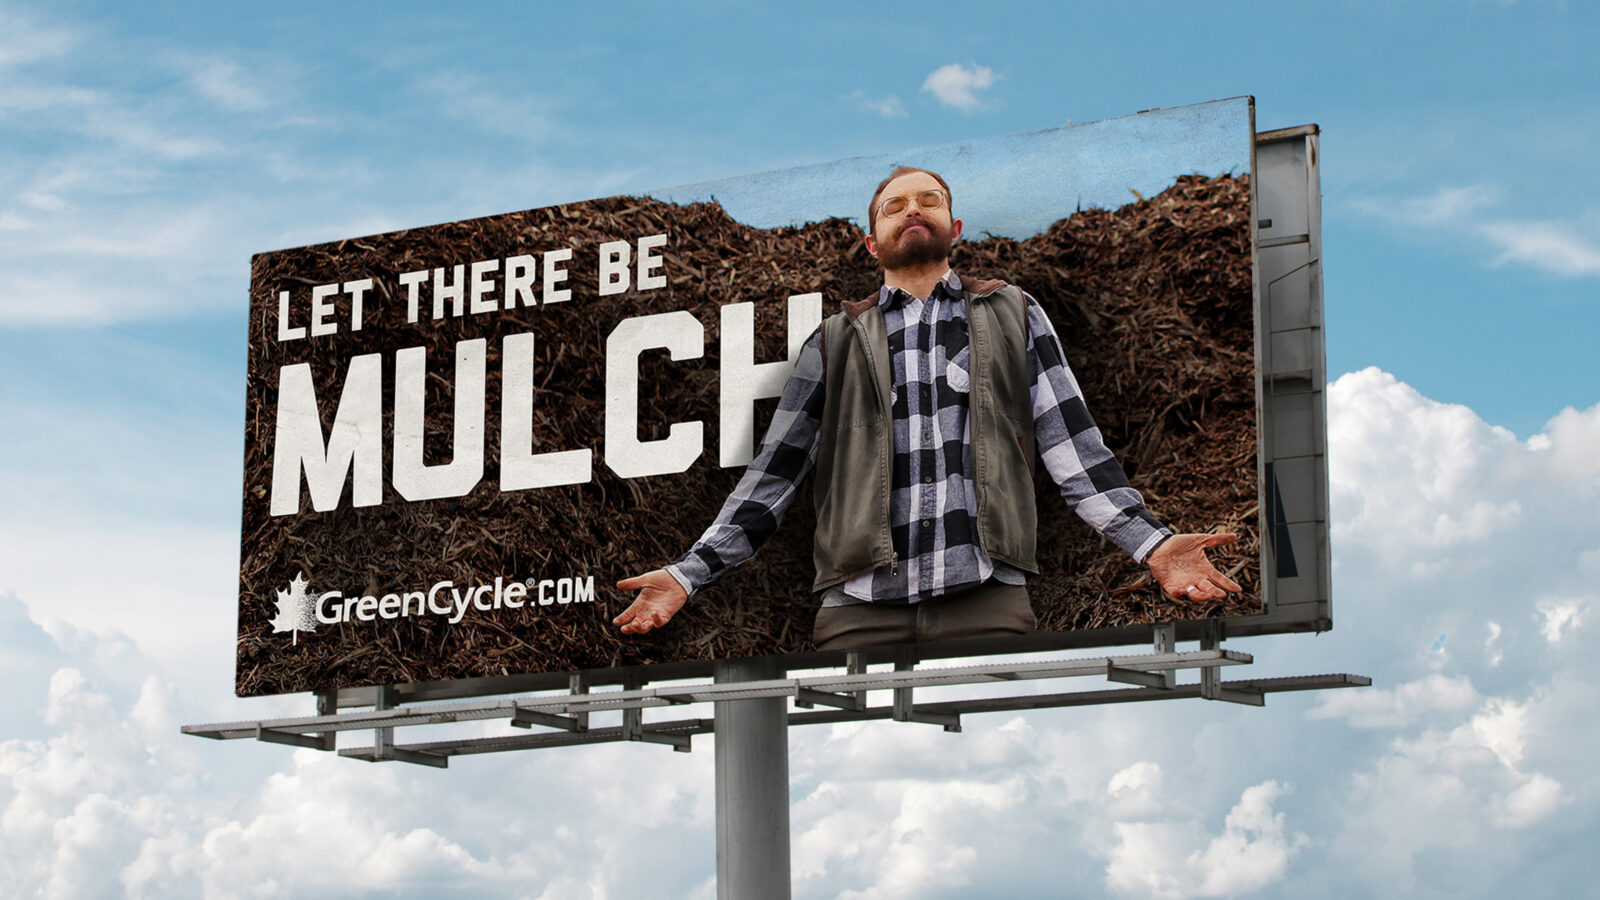 Image of Wood chip mulch greencycle